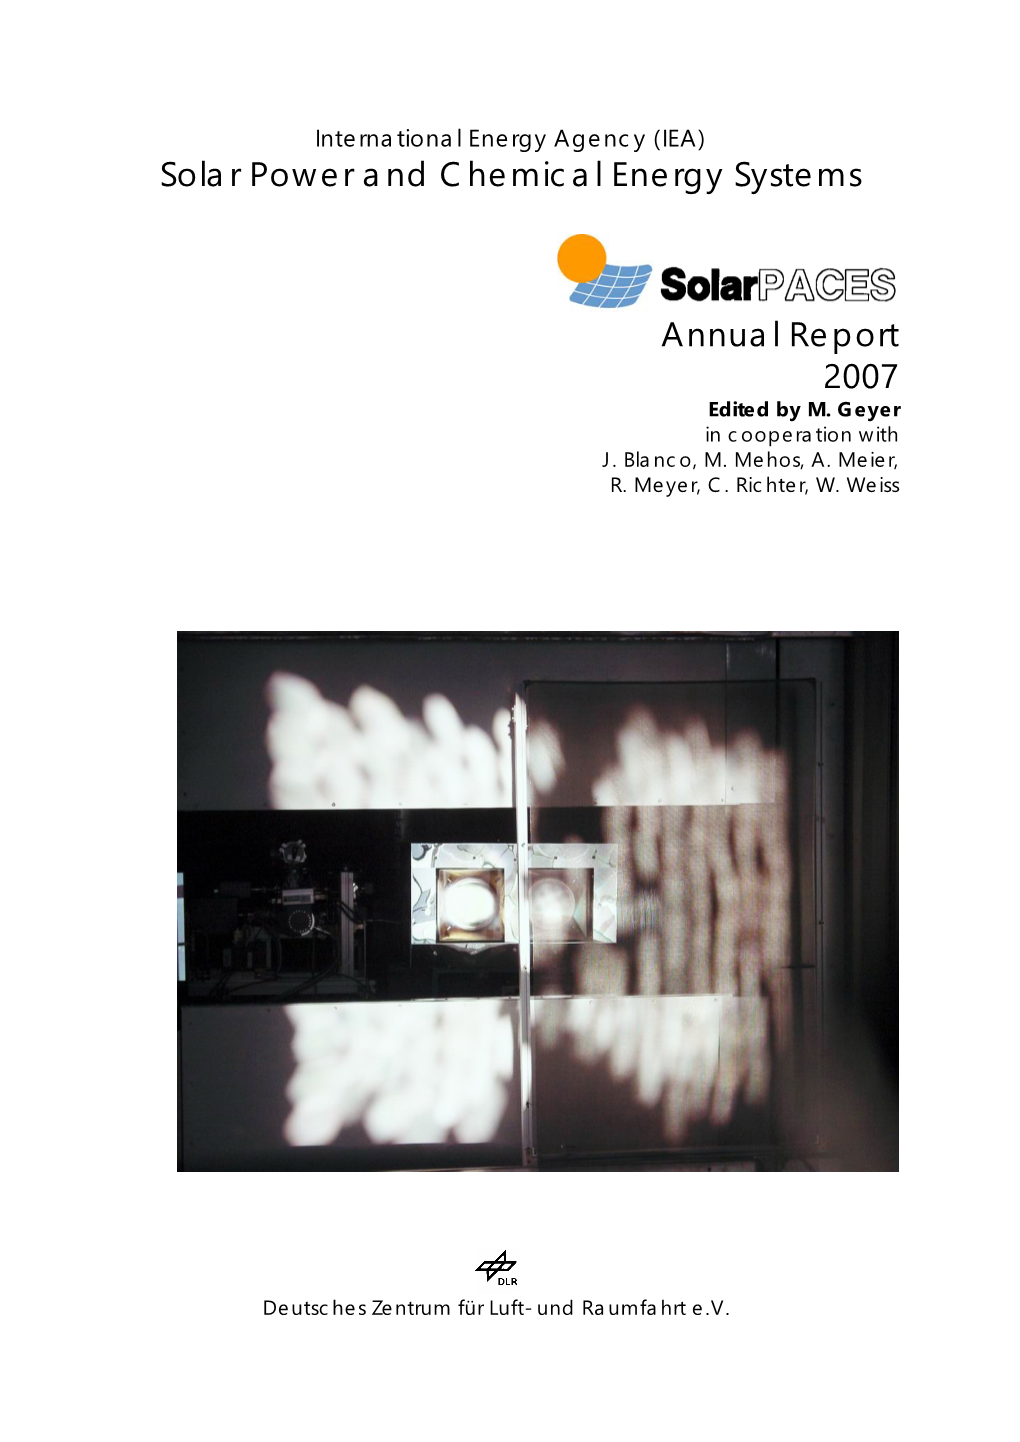 Of the Solarpaces Annual Report 2007